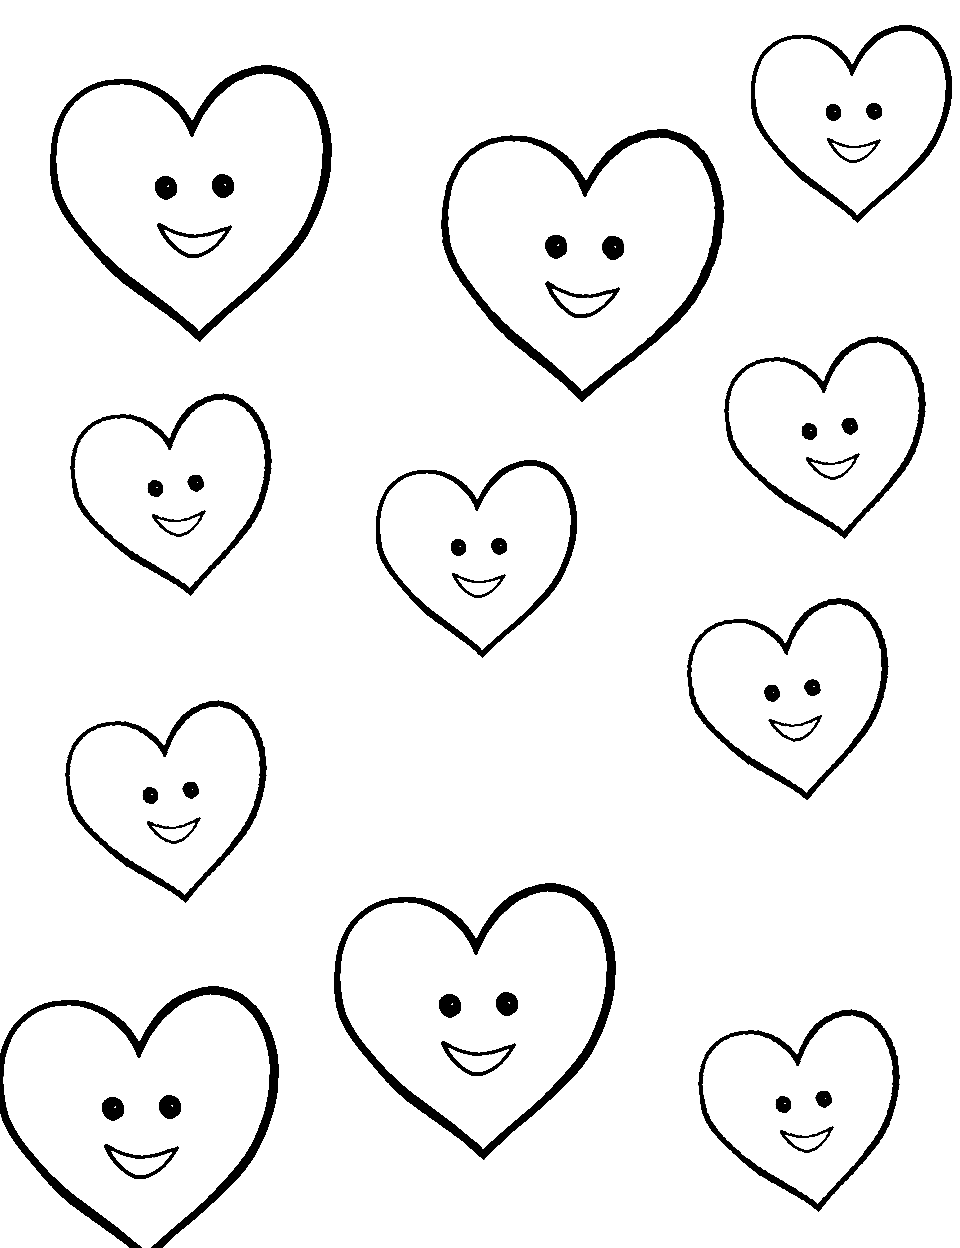 Happy Hearts Coloring Page - Heart shapes with smiling faces.